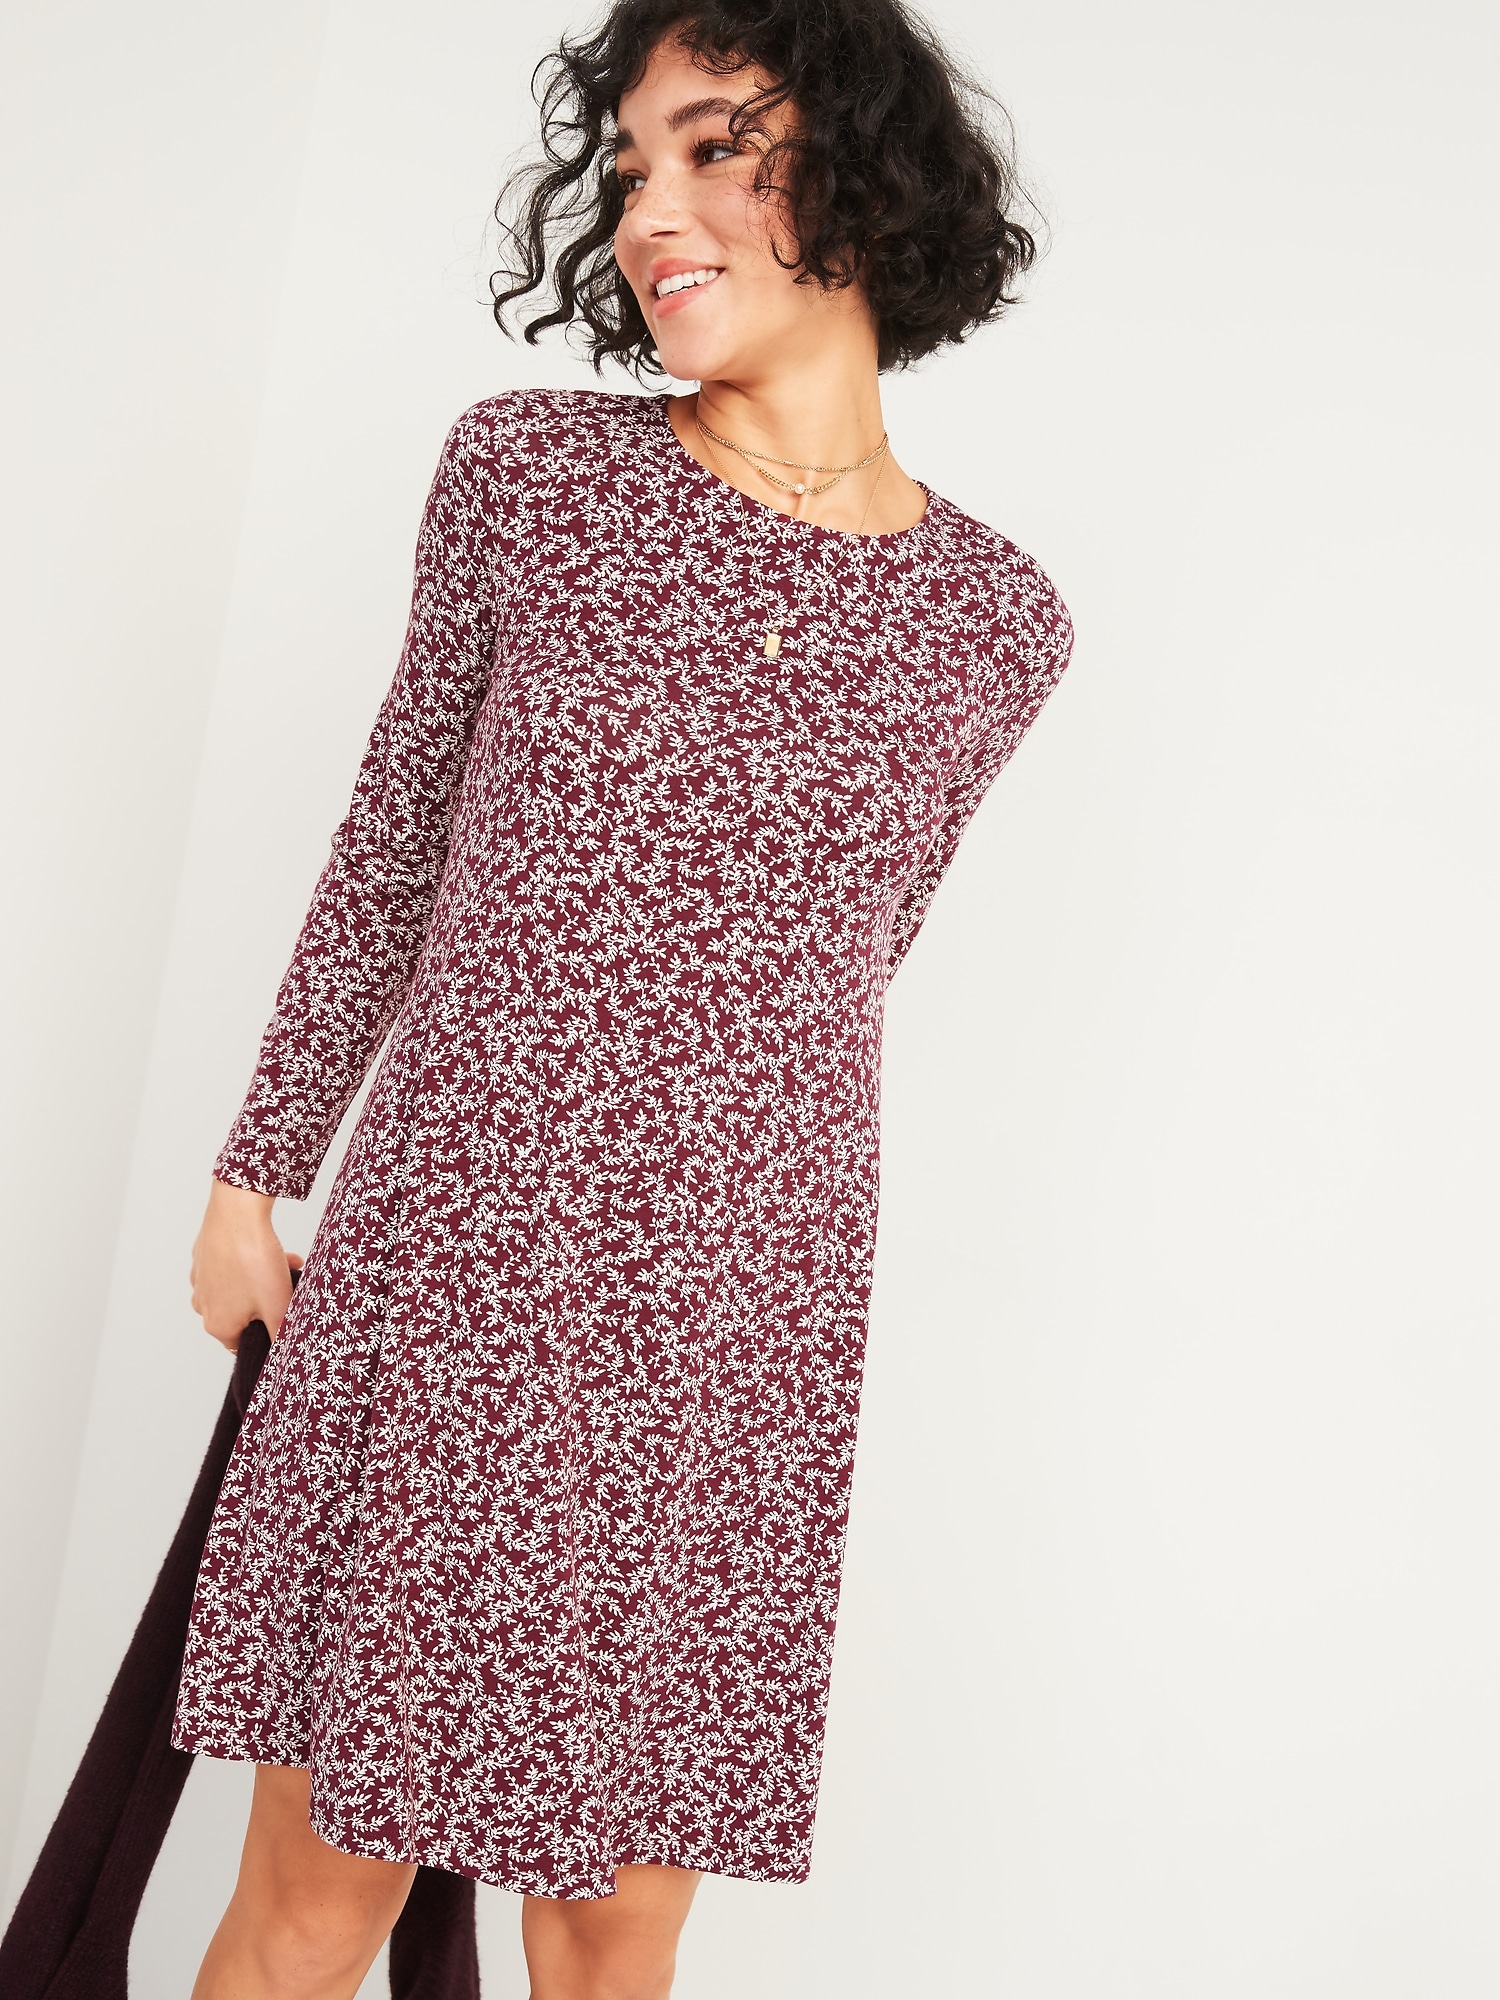 Printed Jersey-Knit Long-Sleeve Swing Dress | Old Navy